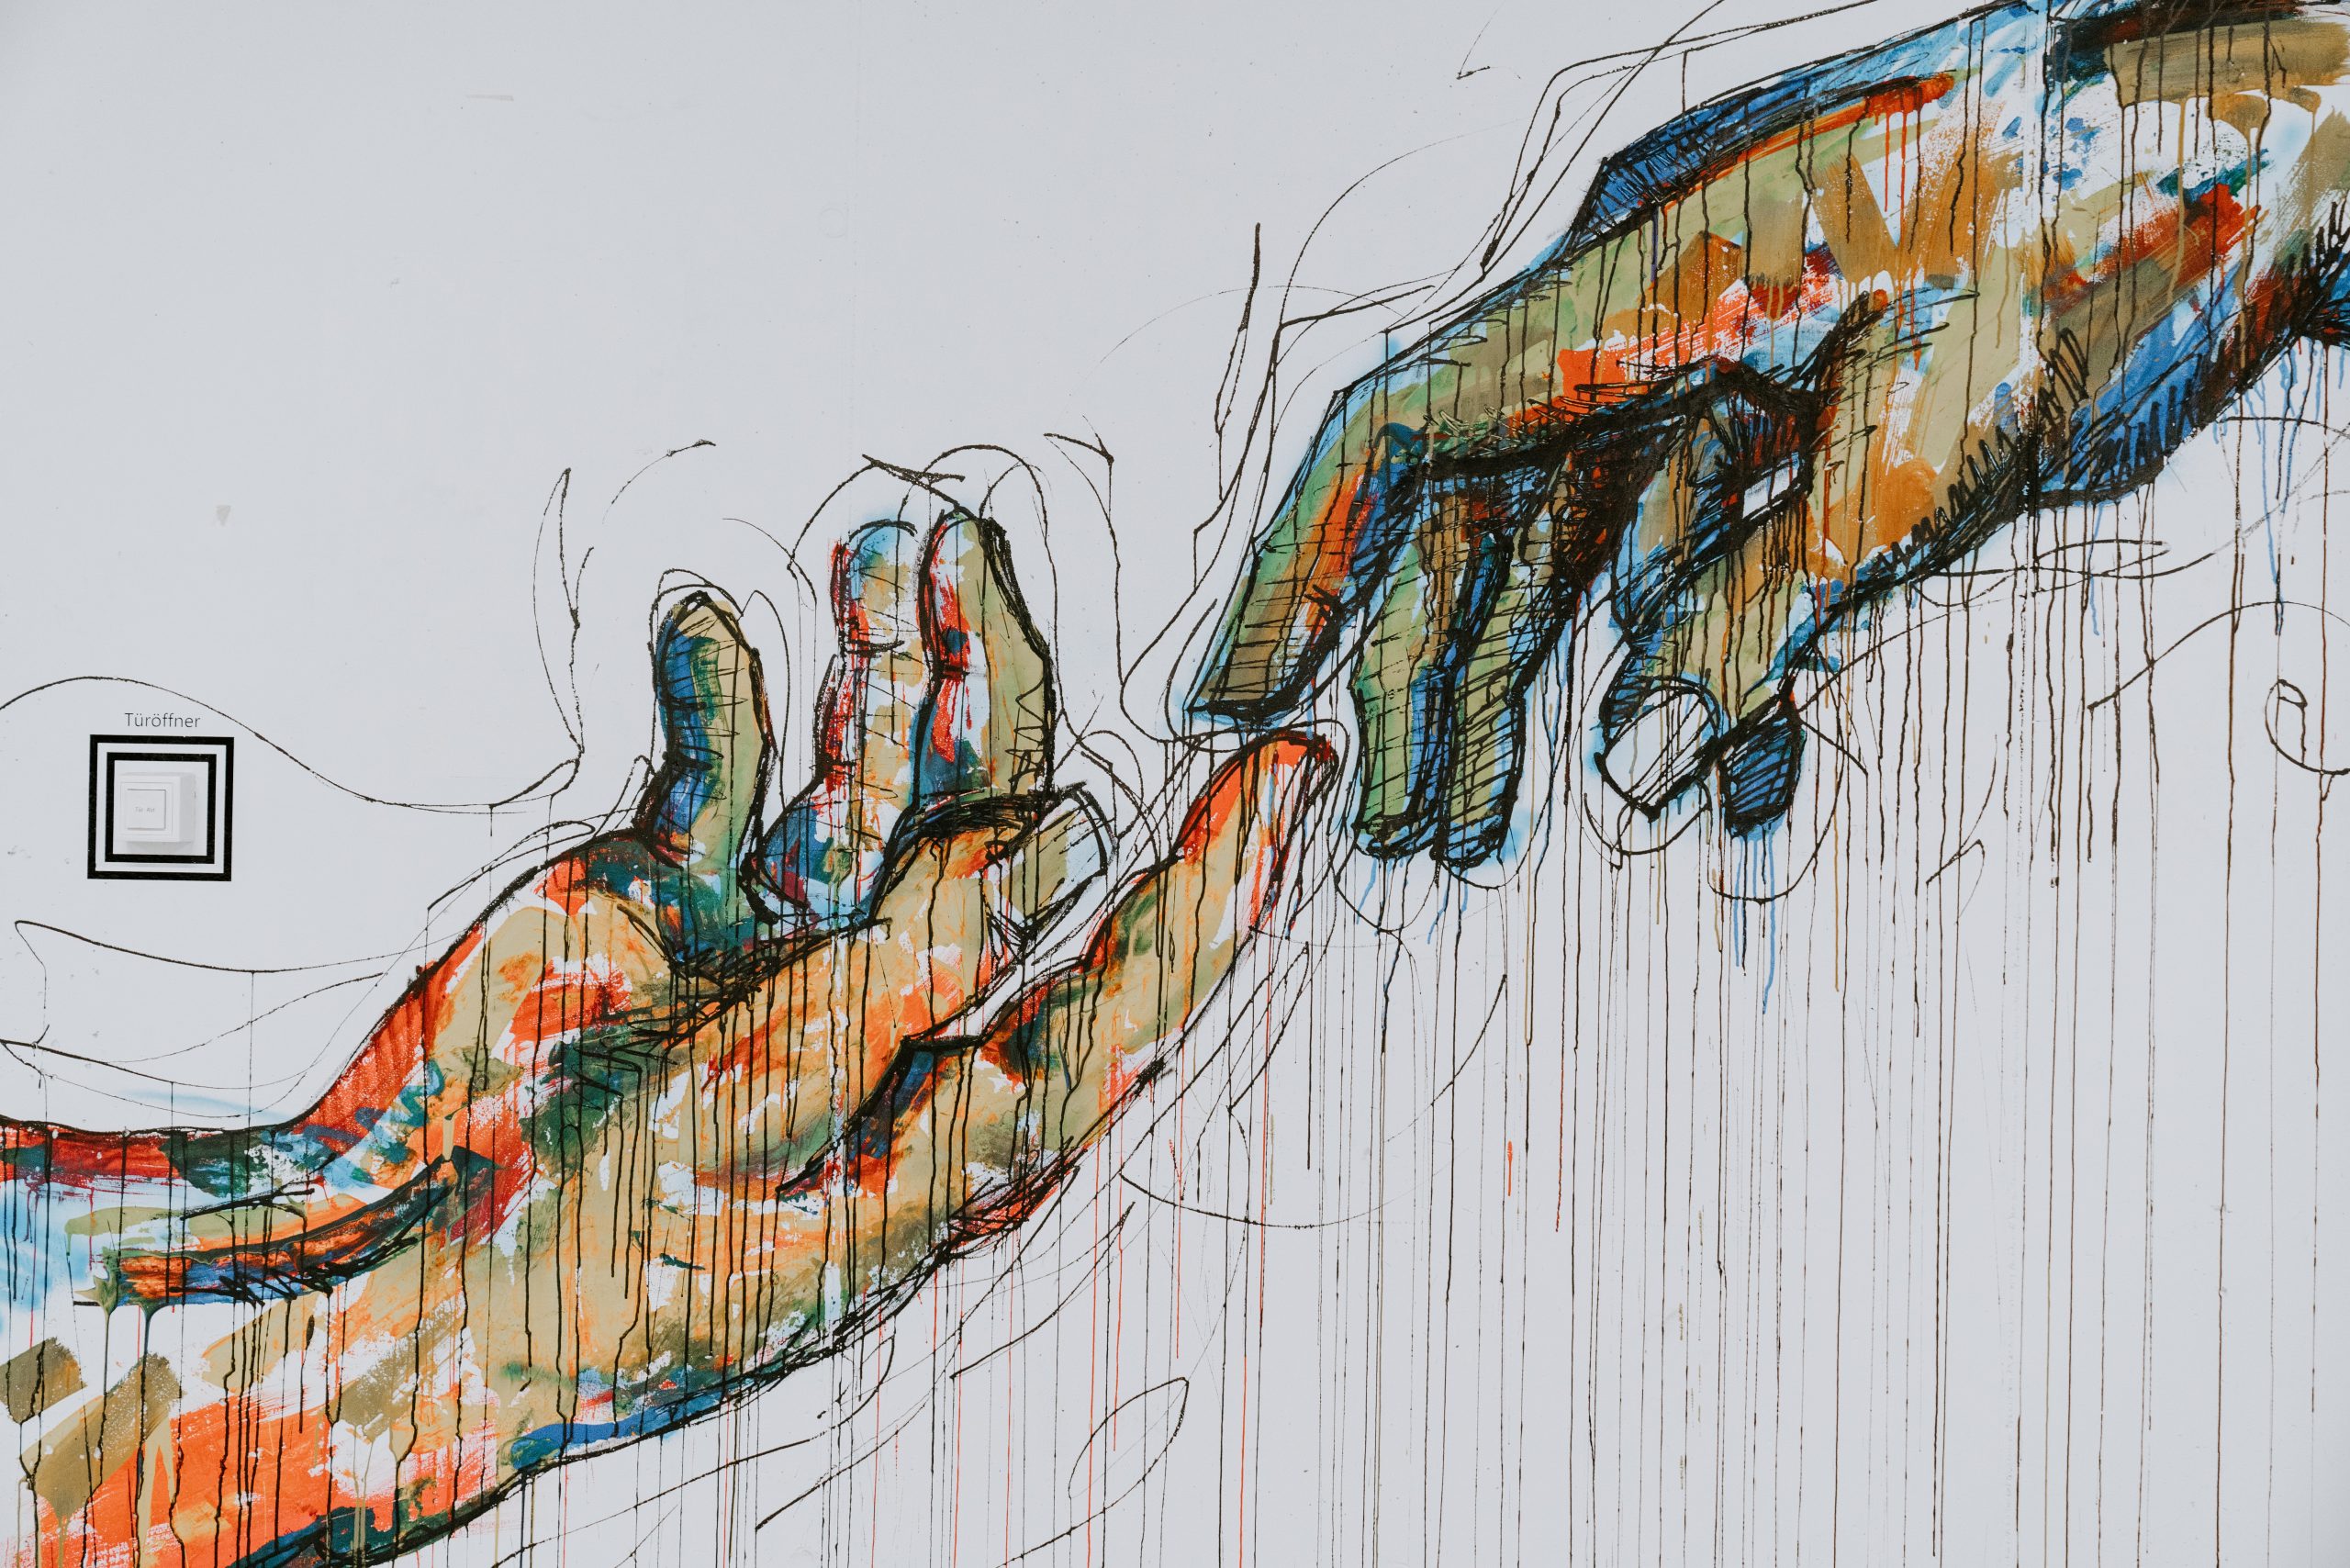 A computer generated color sketch of two hands reaching out for the other, their index fingers barely touching.